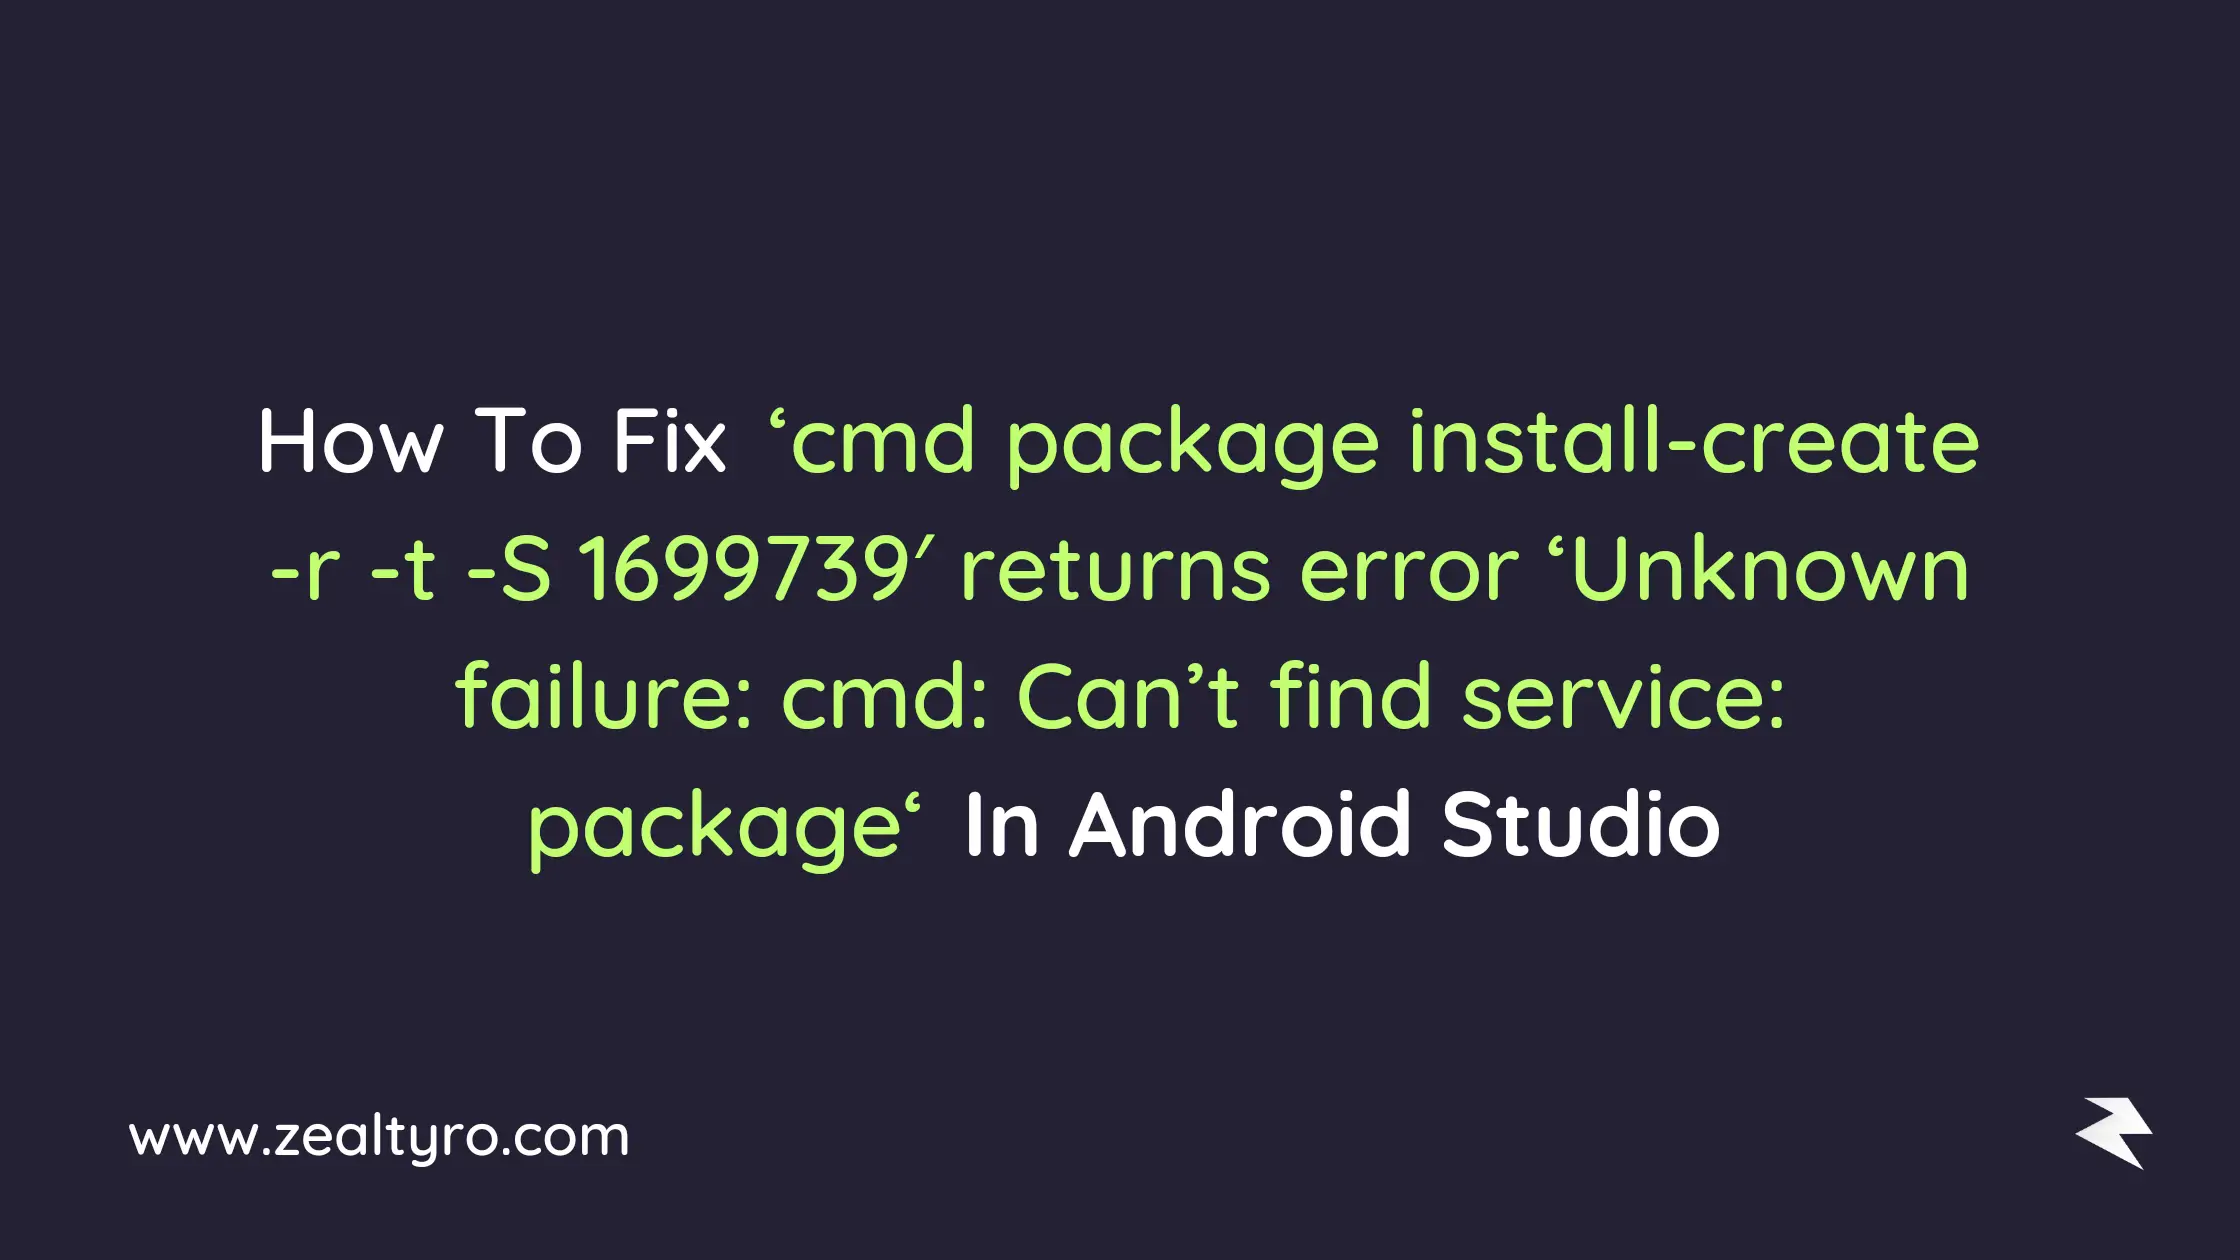 How To Fix ‘Unknown failure: cmd: Can’t find service: package’ Easily in Android Studio